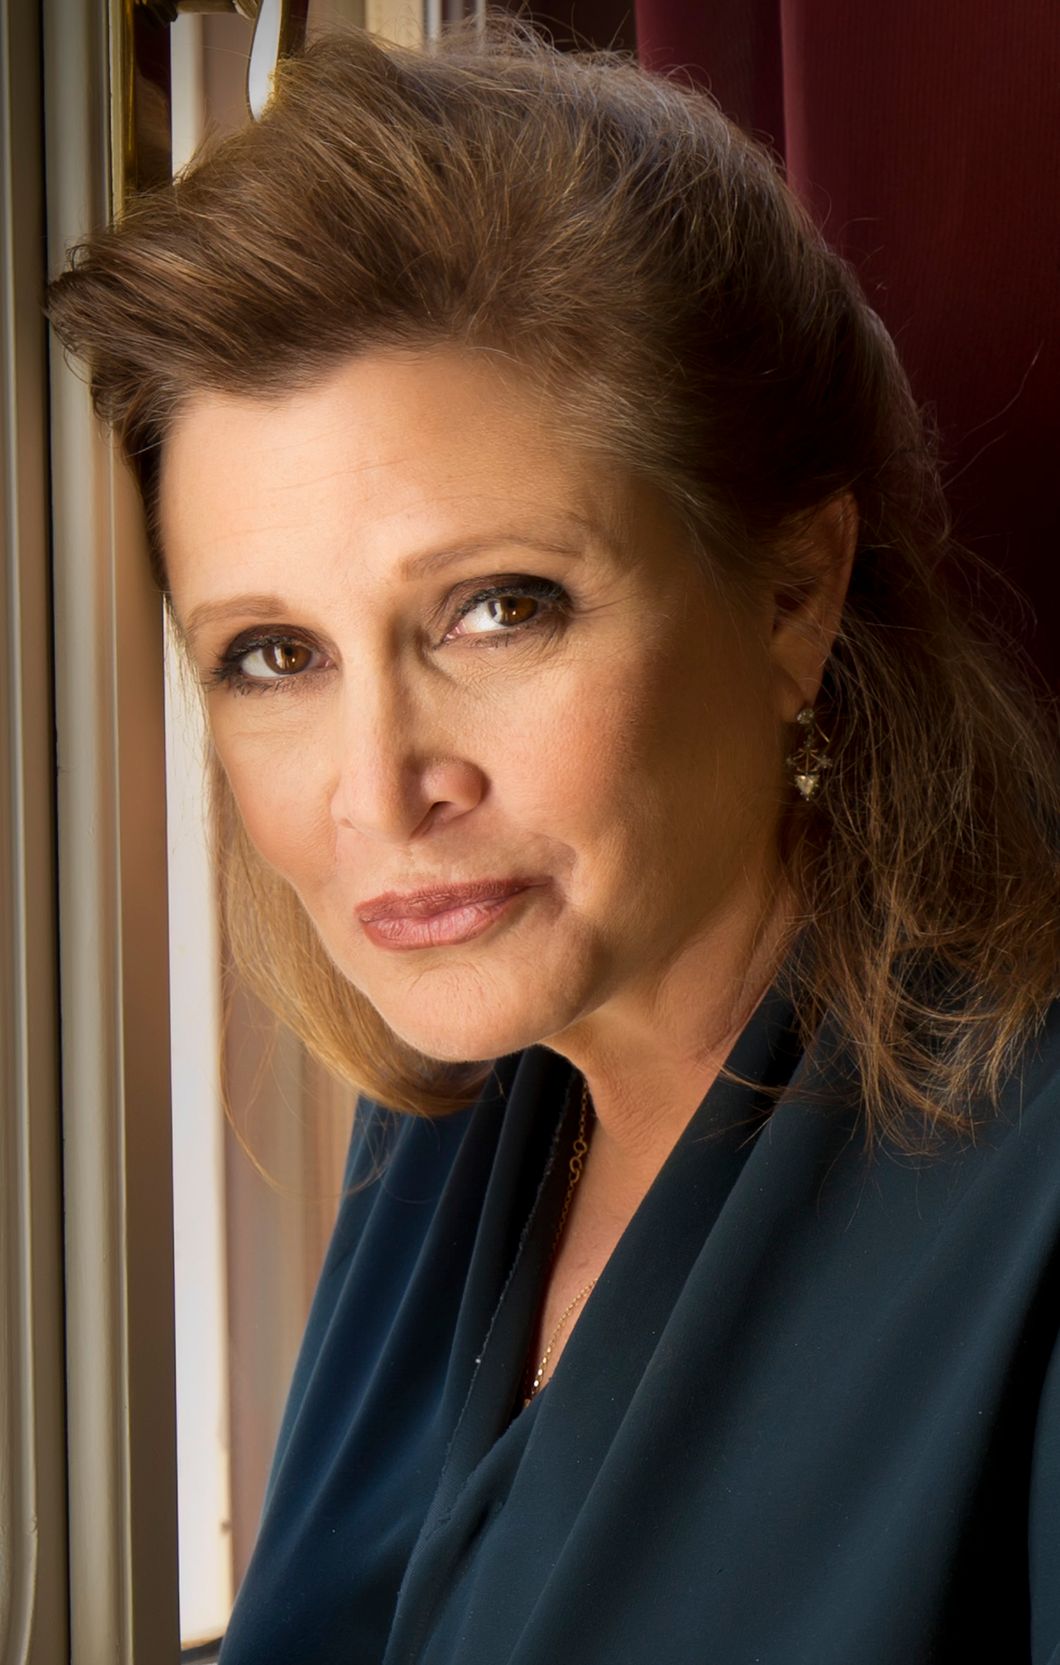 Seeing Leia In Episode 9 Will Be Good, But Heartbreaking